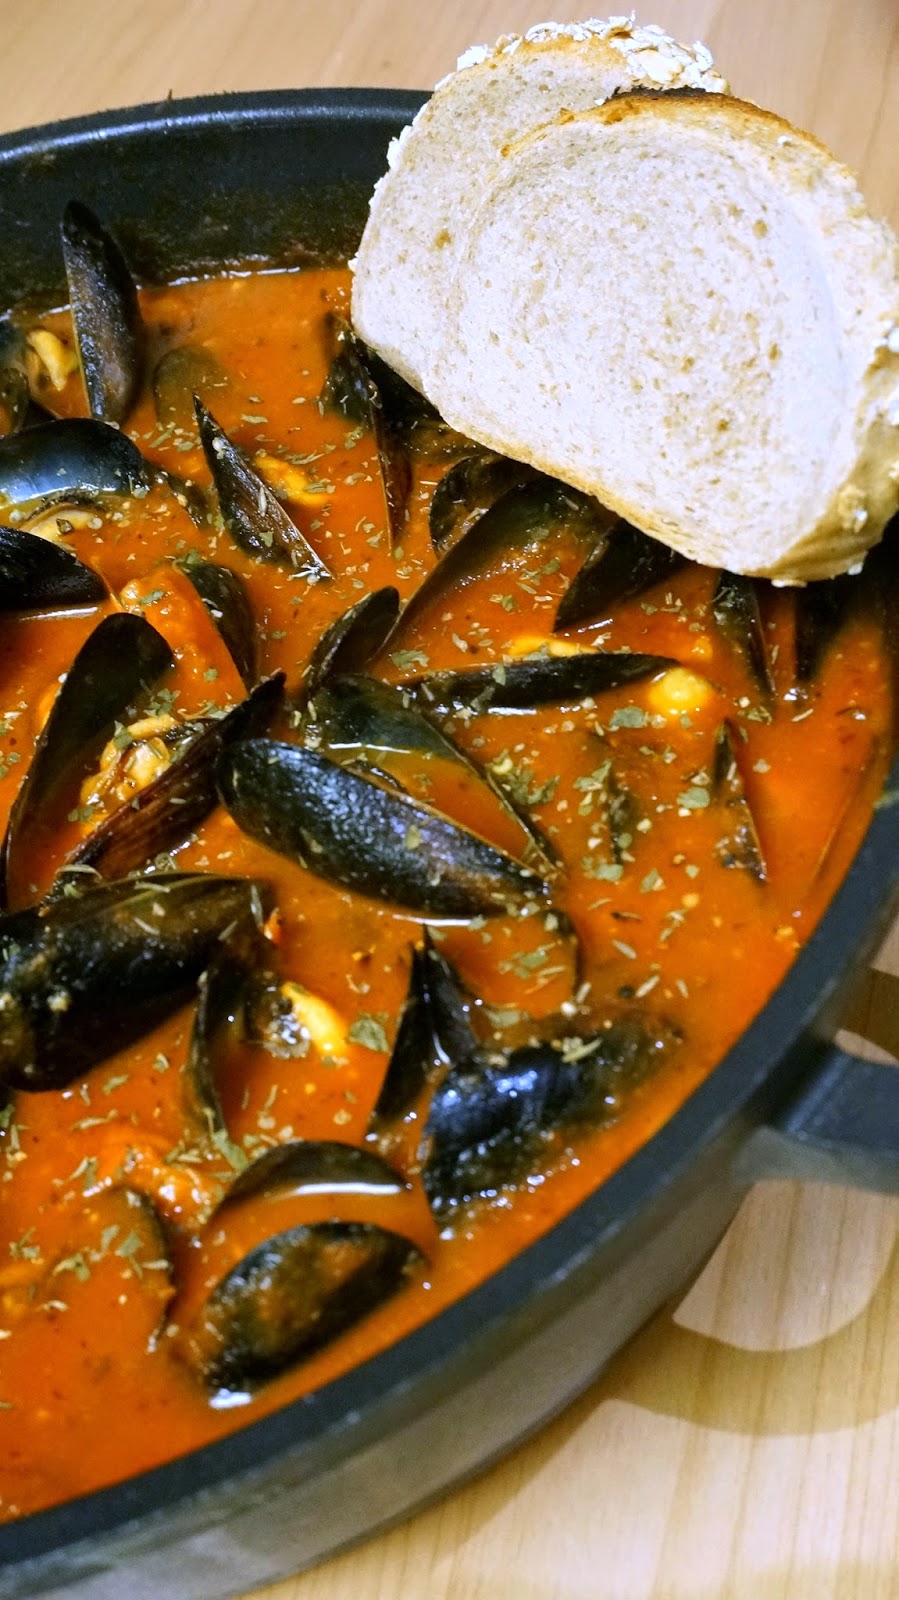 Recipe: Steamed Mussels in Garlic, Tomato Broth